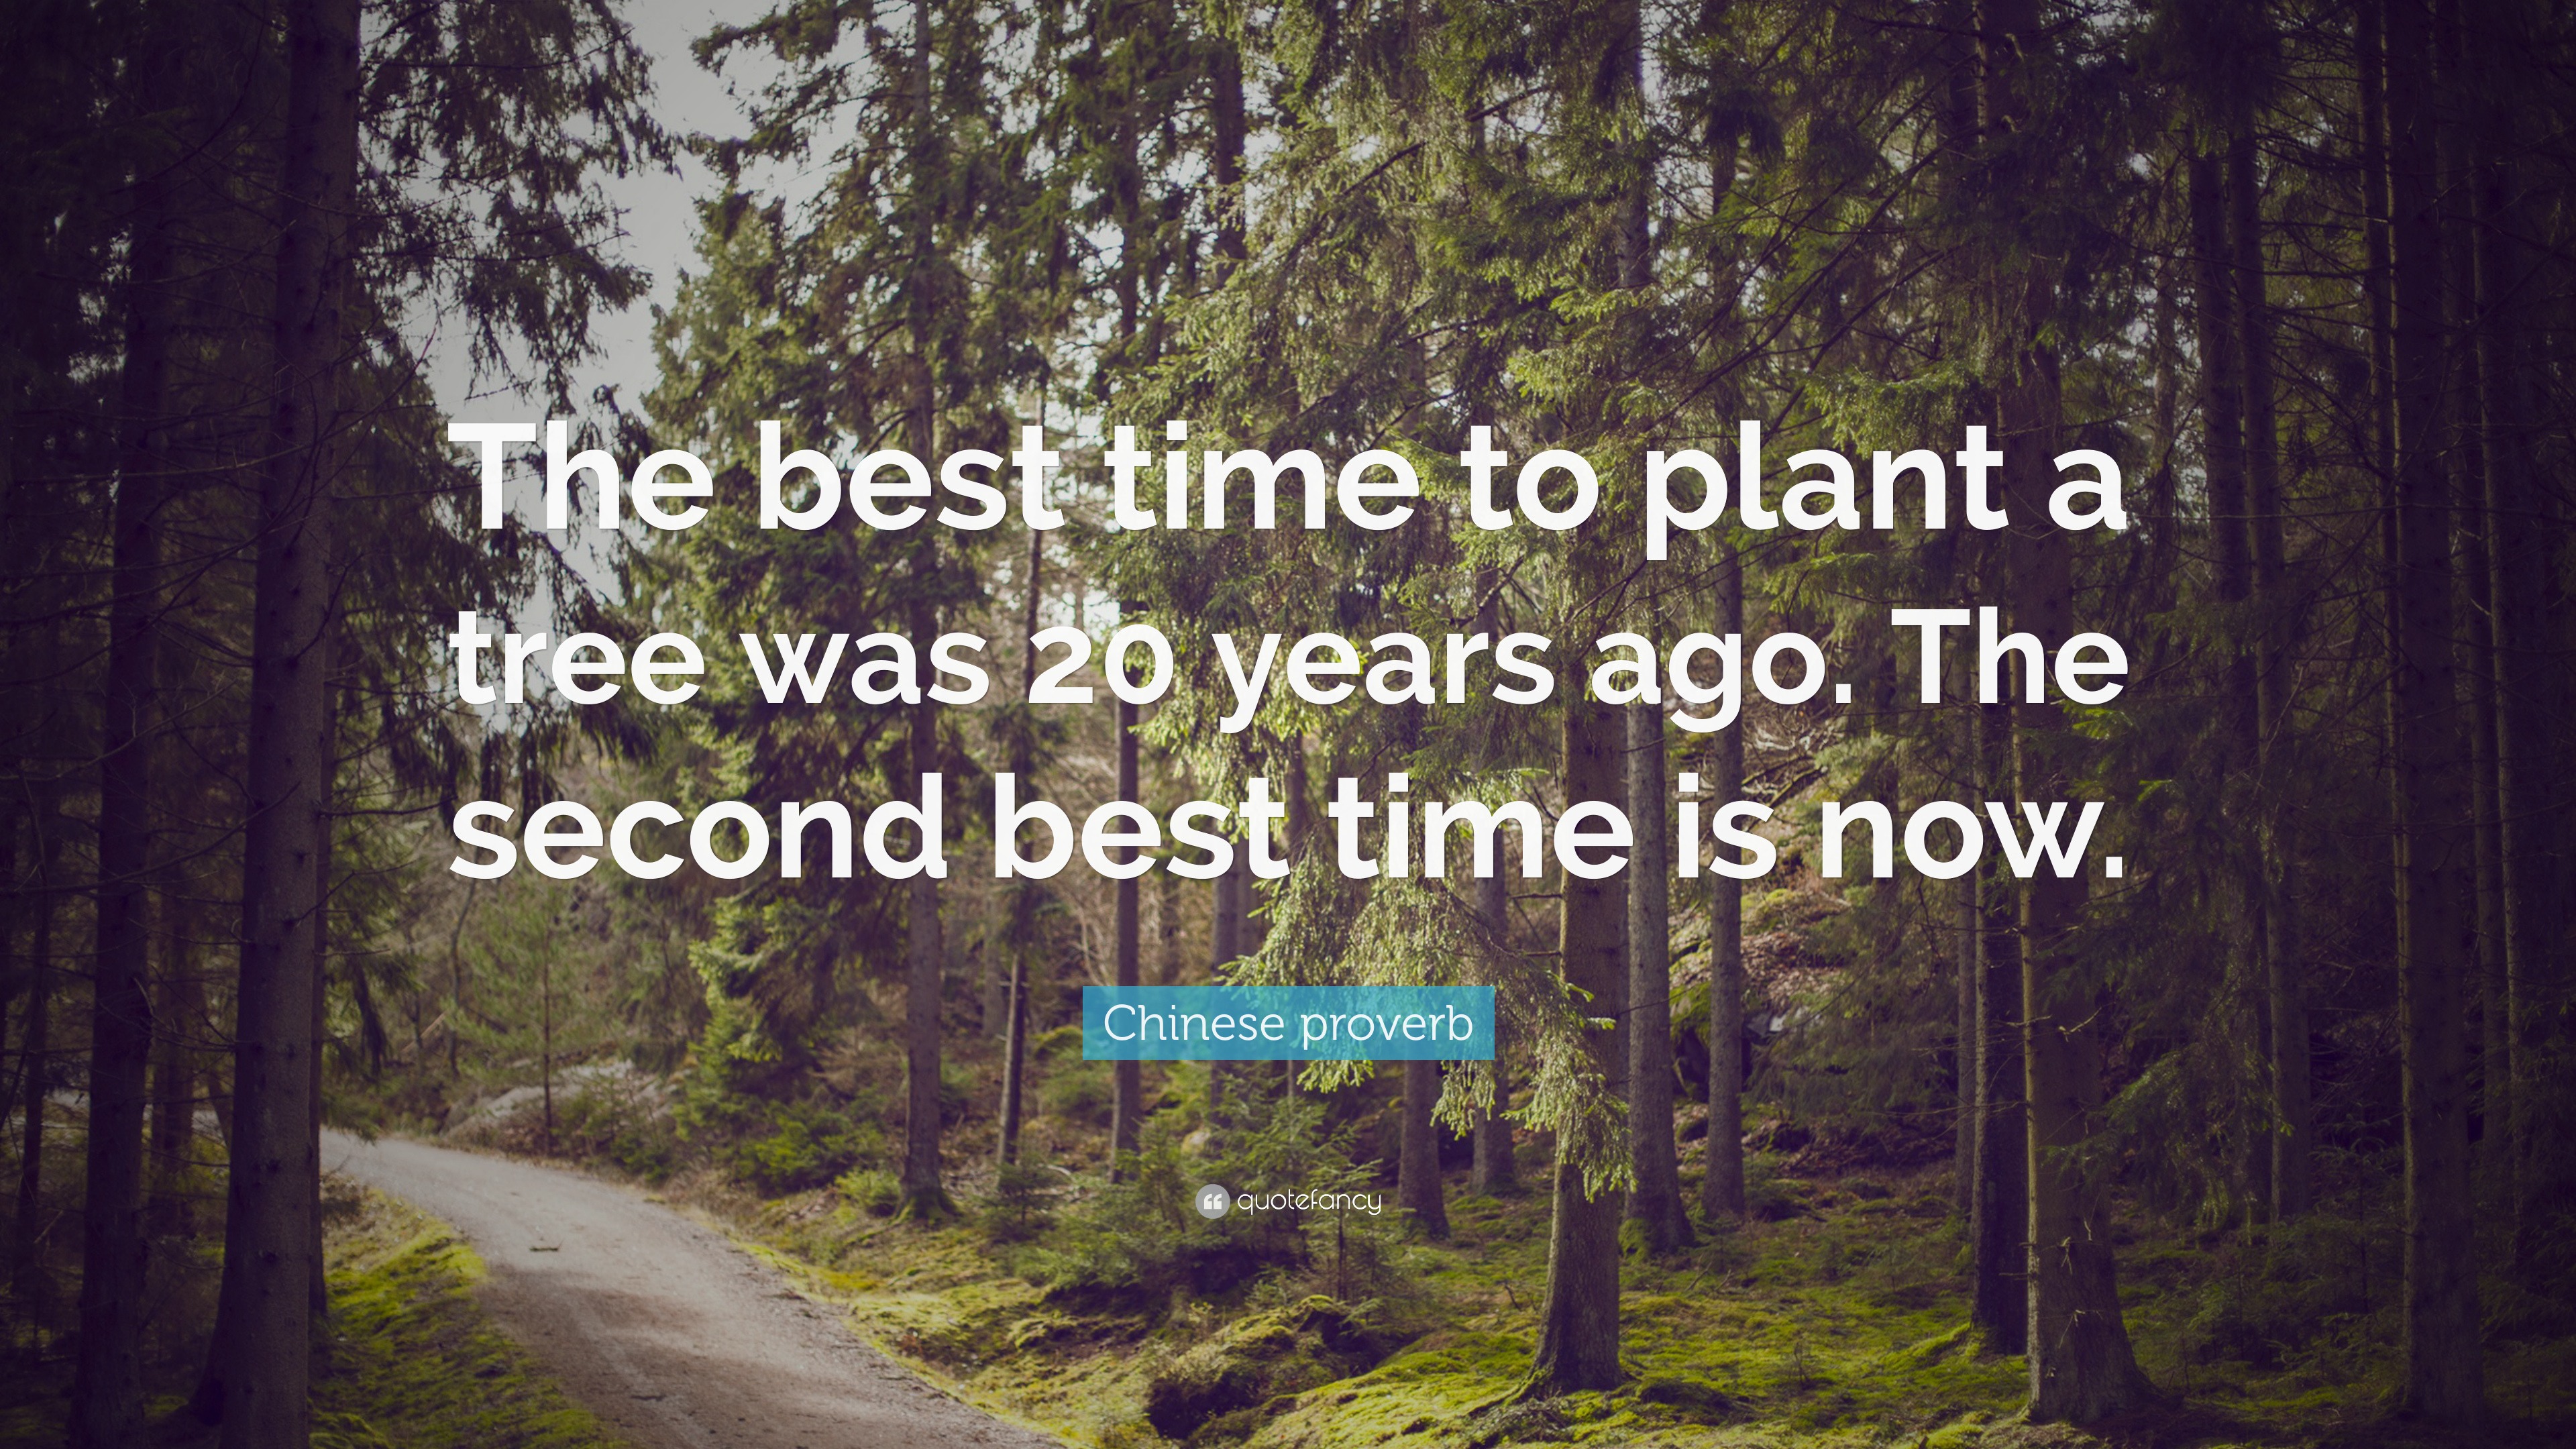 How come the saying is the best time to plant a tree was 20 years ago